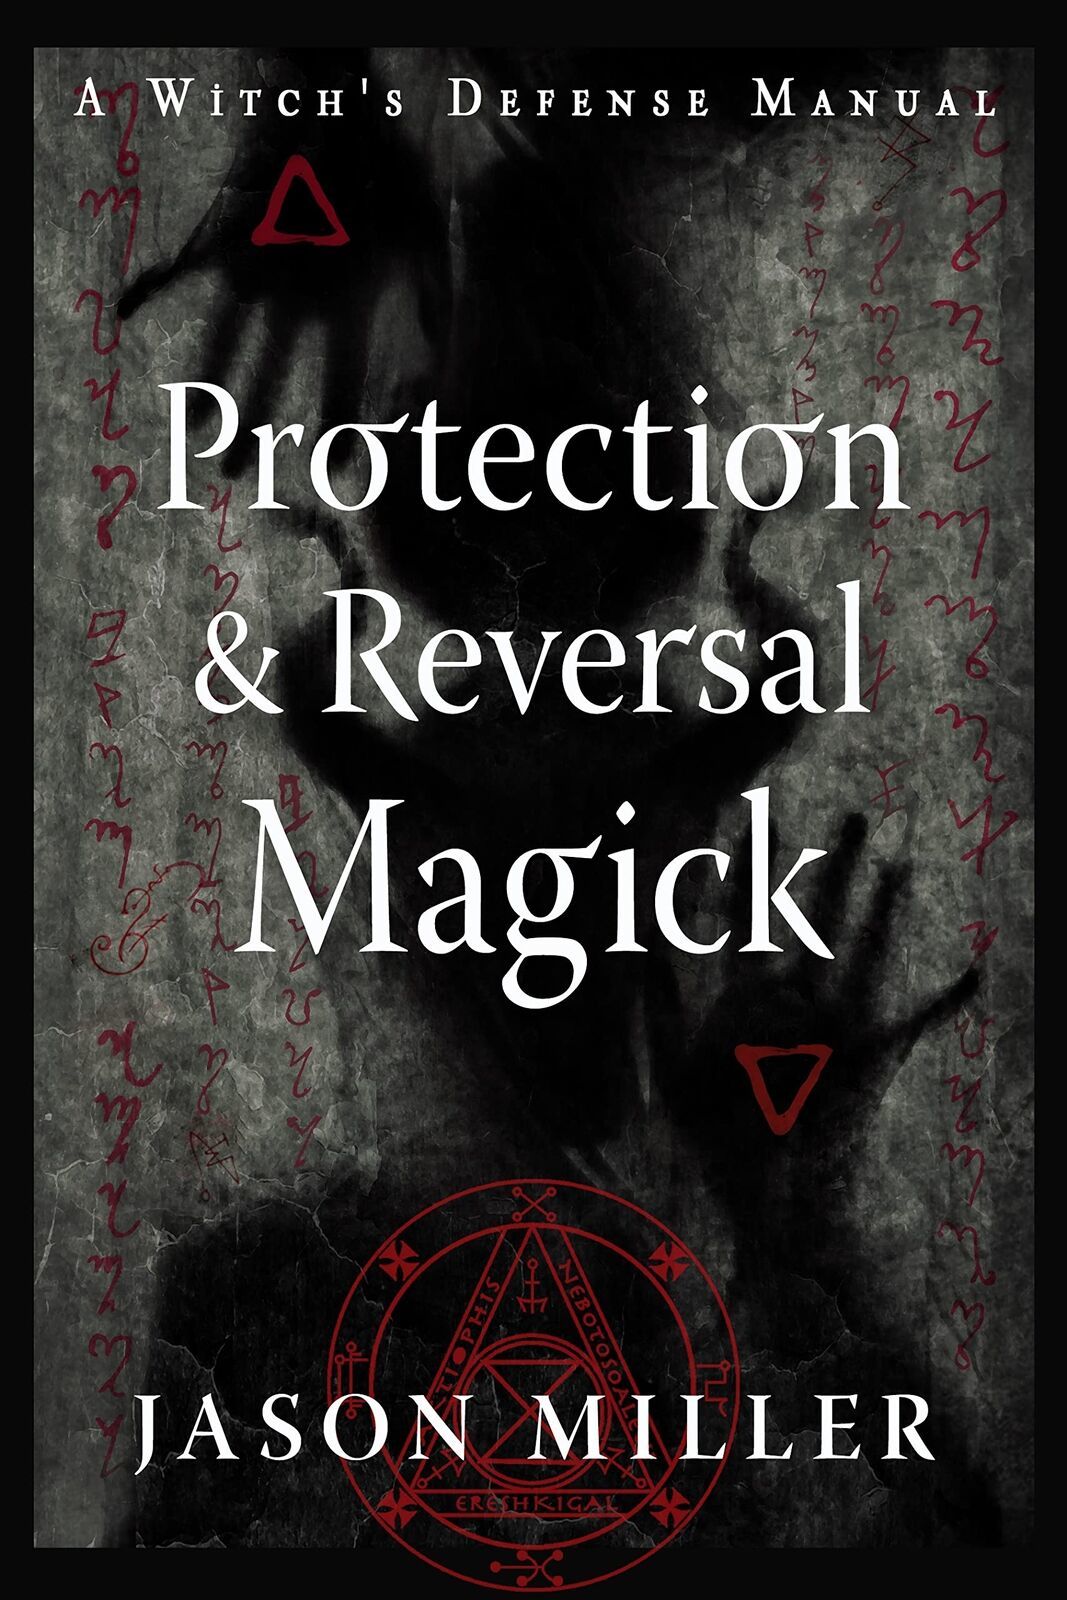 Primary image for Protection & Reversal Magick (Revised and Updated Edition): A Witch's Defense